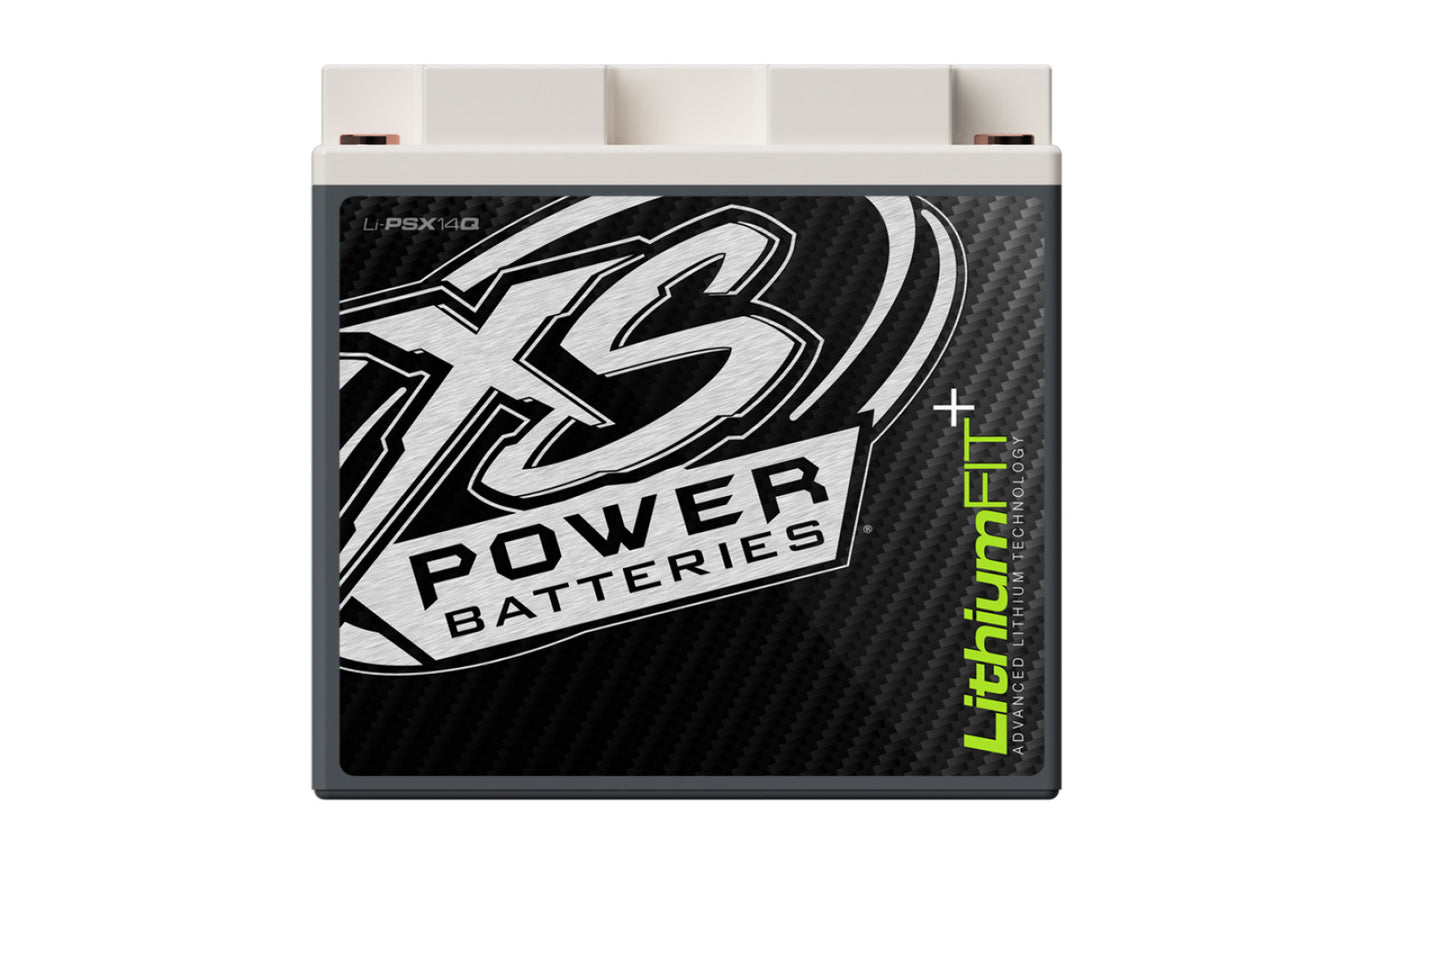 XS Power Batteries Lithium Powersports Series Batteries - M6 Terminal Bolts Included 480 Max Amps